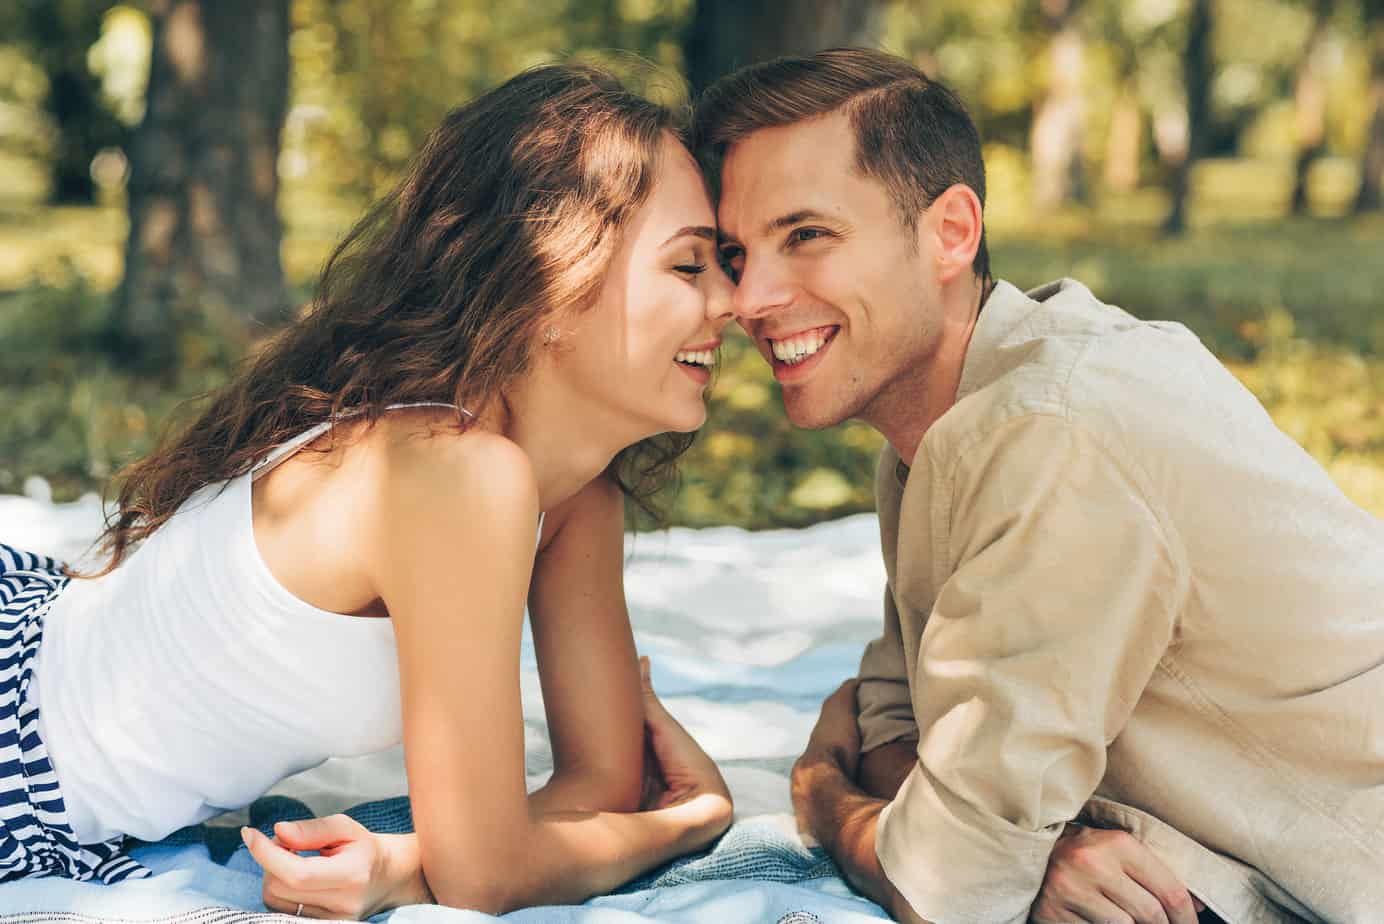 https://twodrifters.us/wp-content/uploads/2019/10/couple-having-picnic-faces-together-smiling-summer-outdoors-romance-date-bigstock-Portrait-Of-Happy-Couple-In-Lo-317092564.jpg